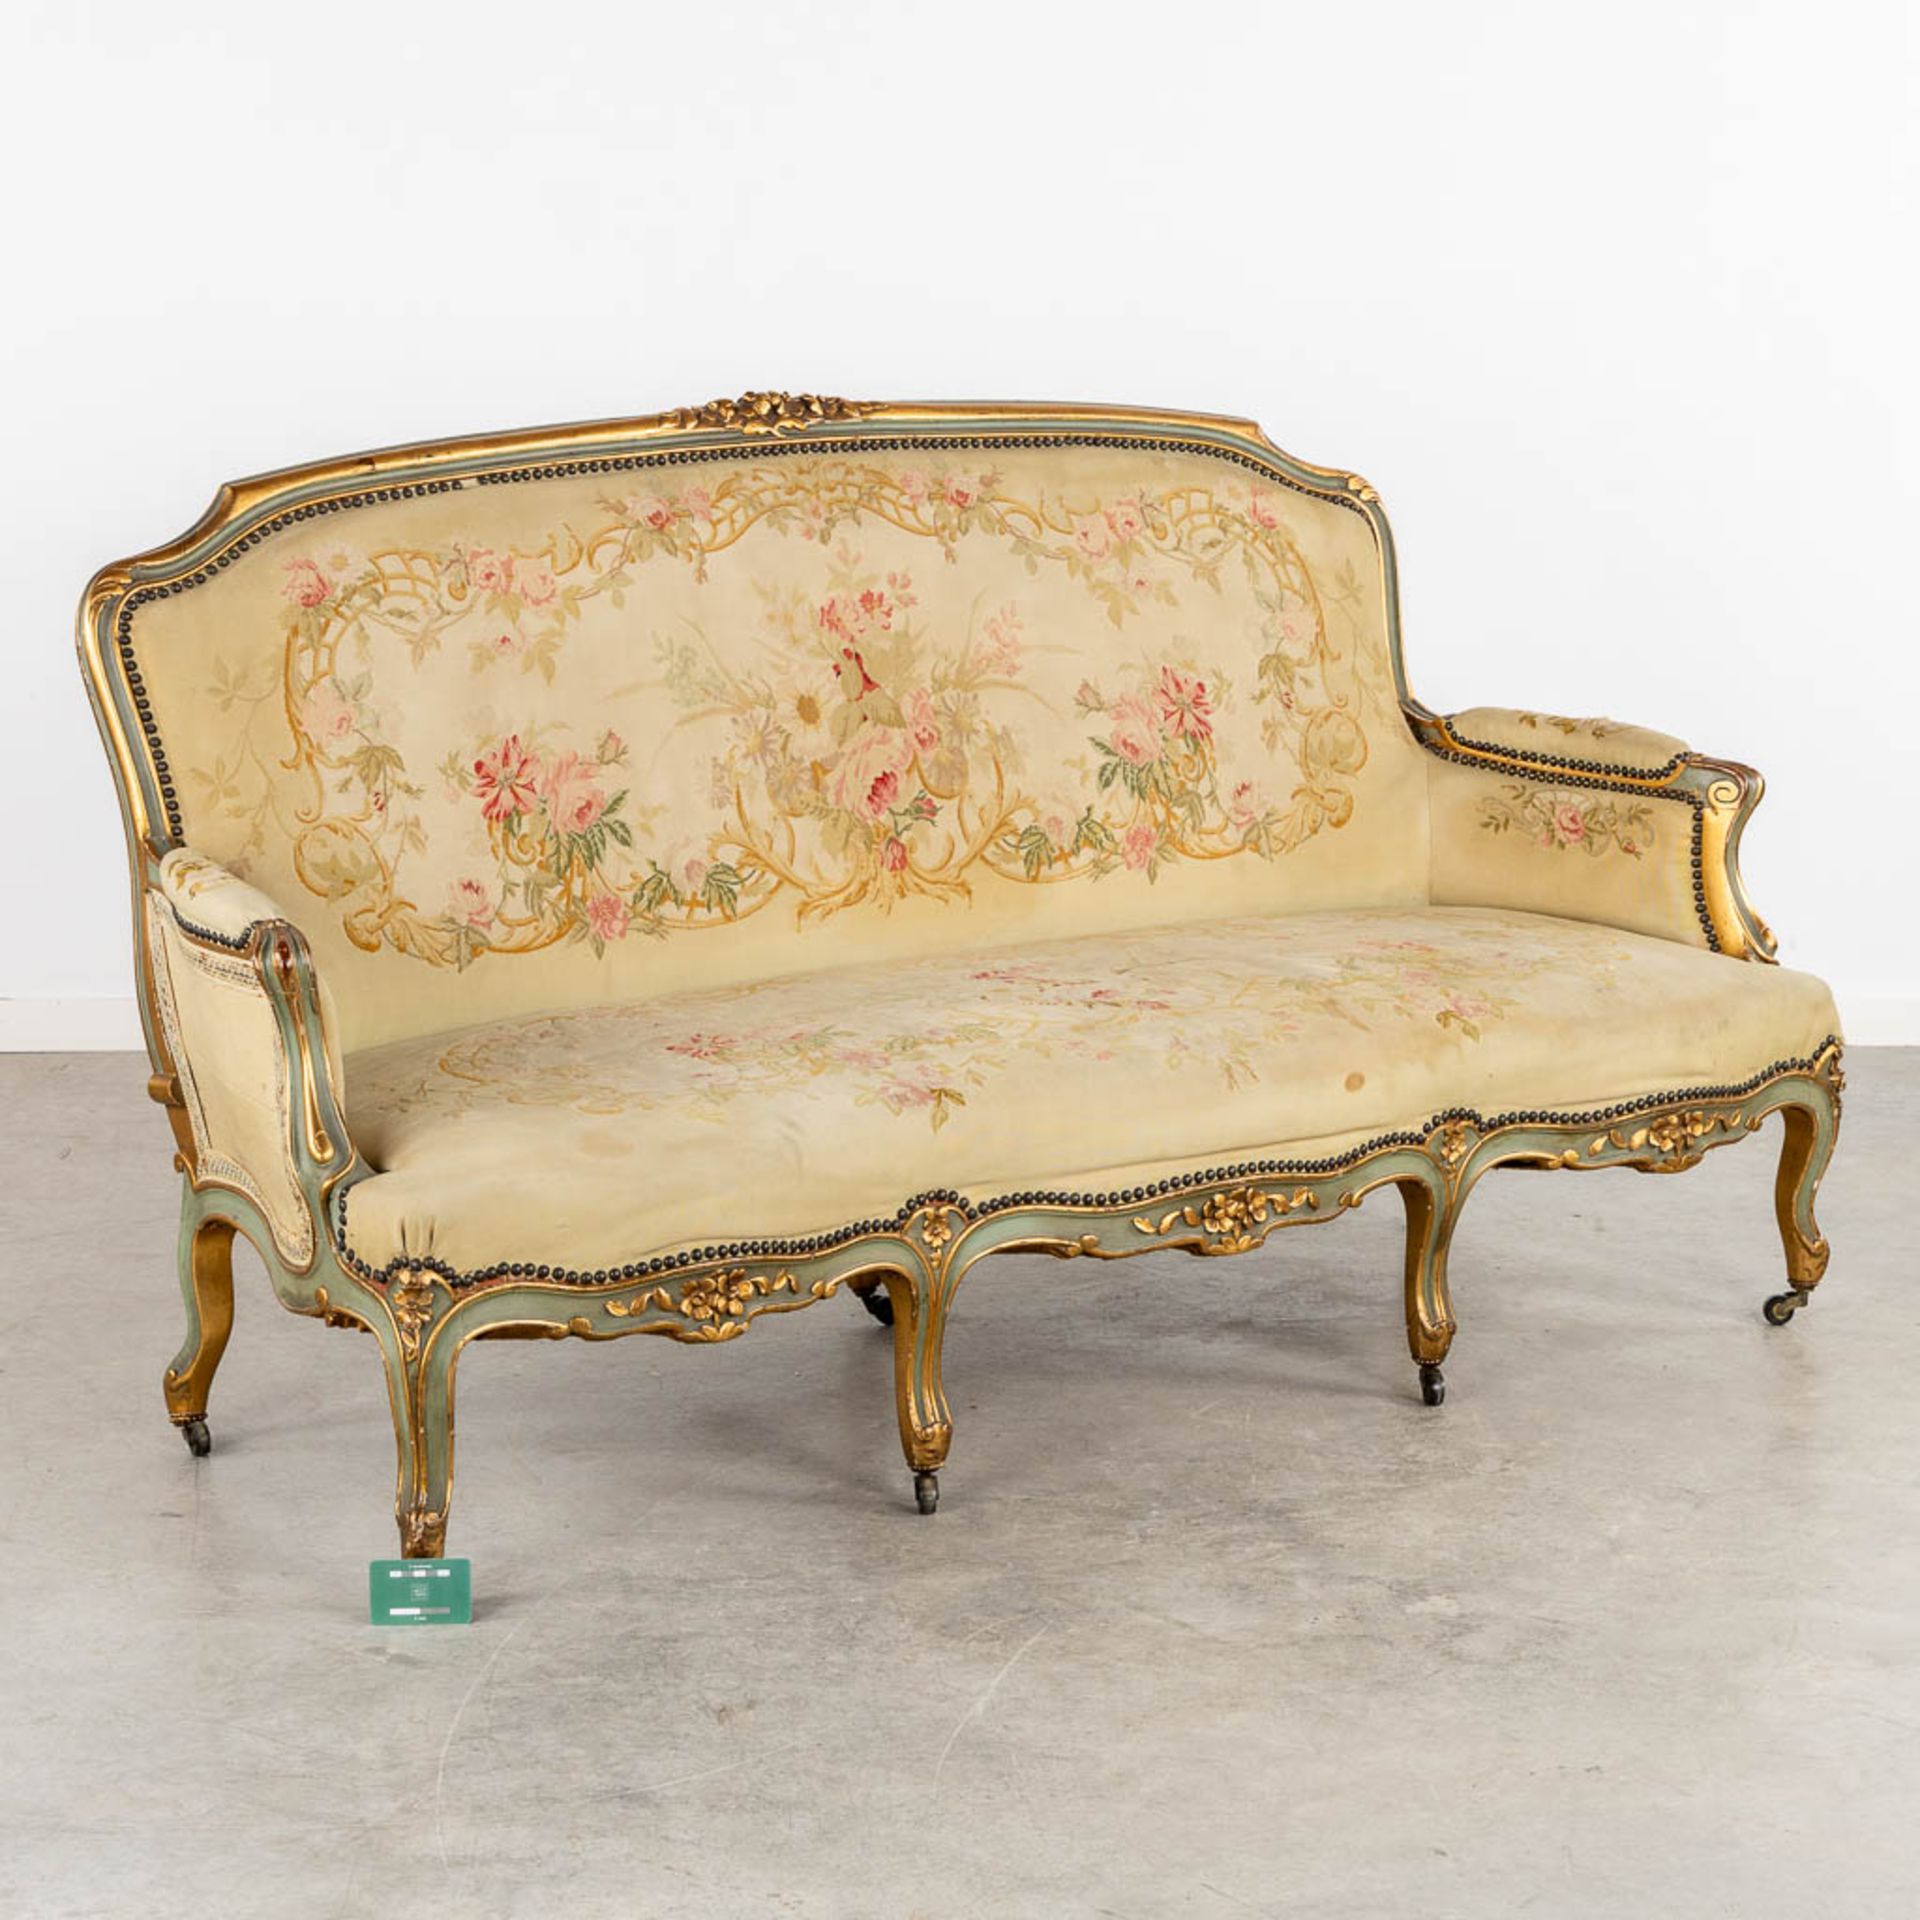 A Louis XV style sofa, upholstered with flower embroideries. (L:80 x W:175 x H:96 cm) - Image 2 of 11